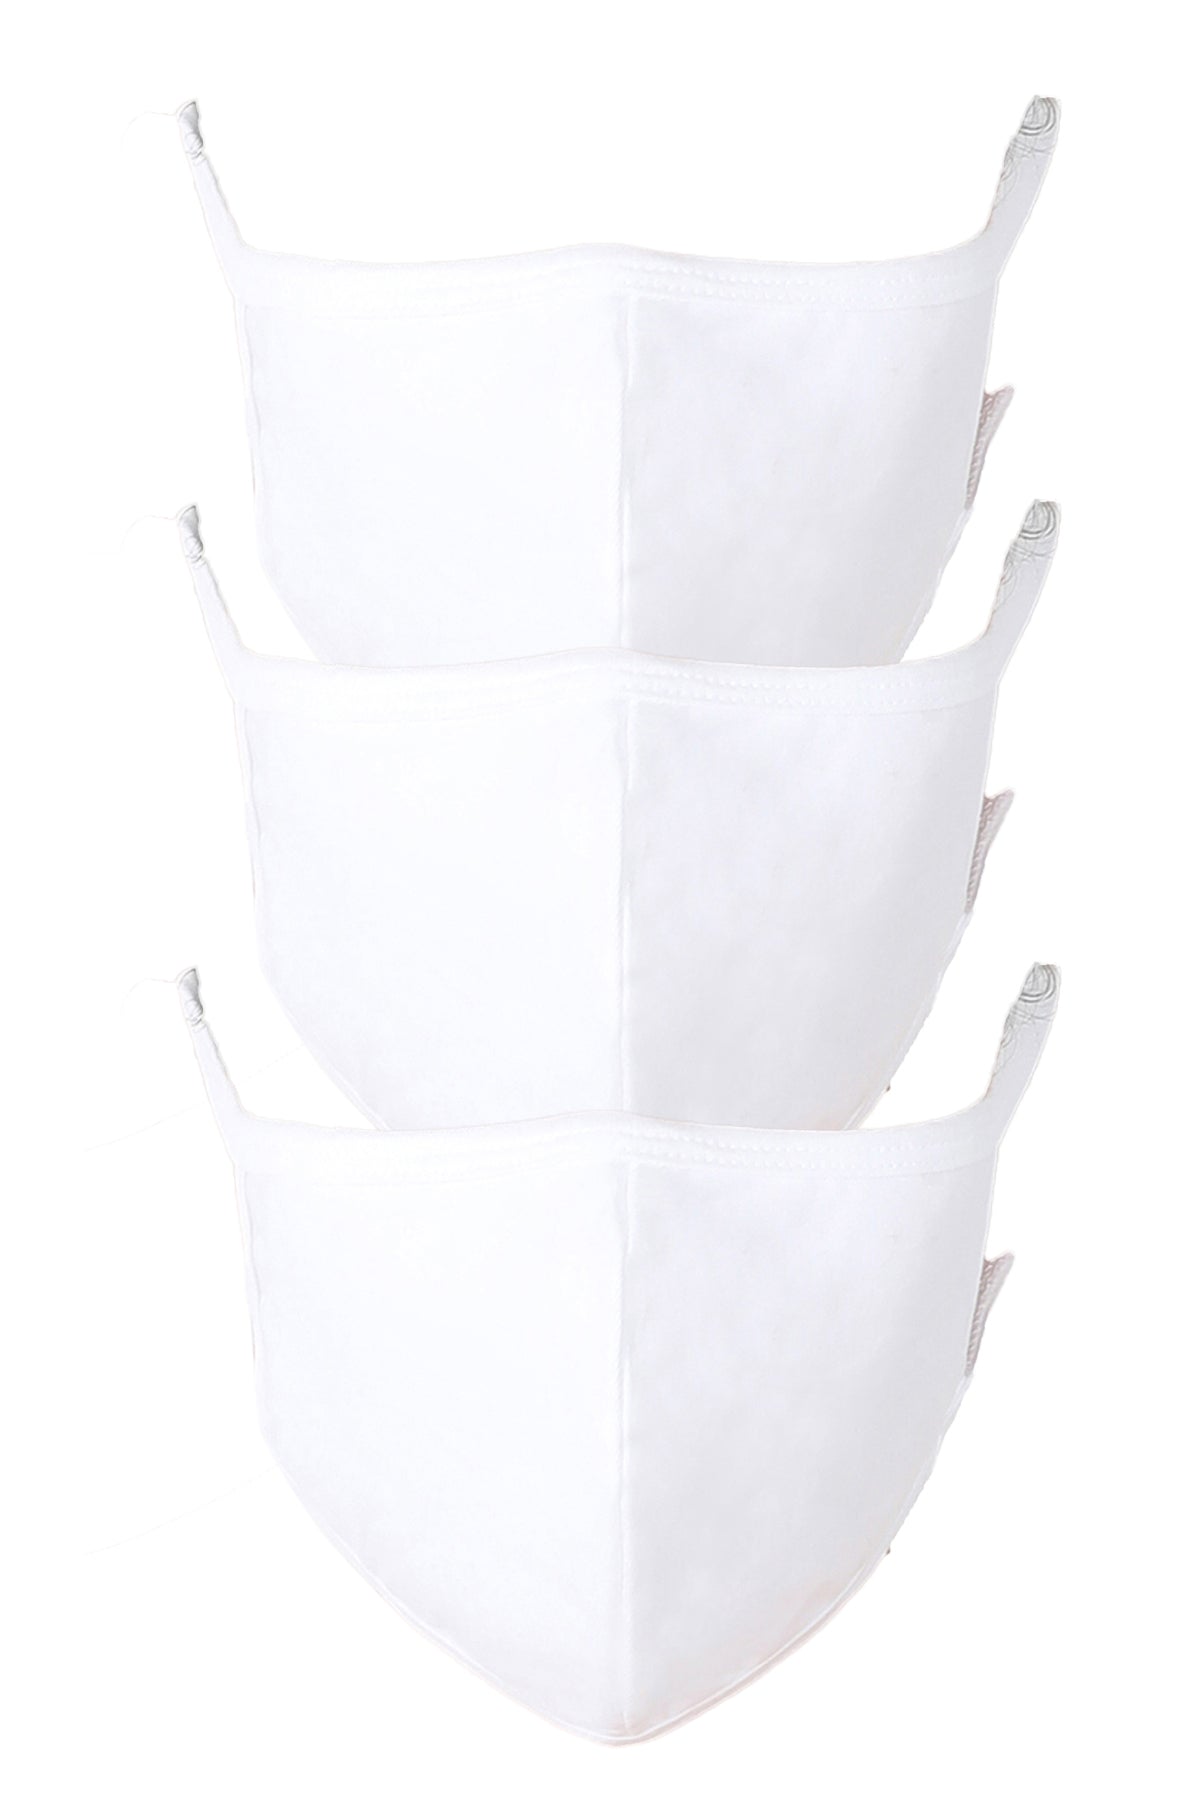 3 PACK Washable Cotton MASK With Filter Pocket